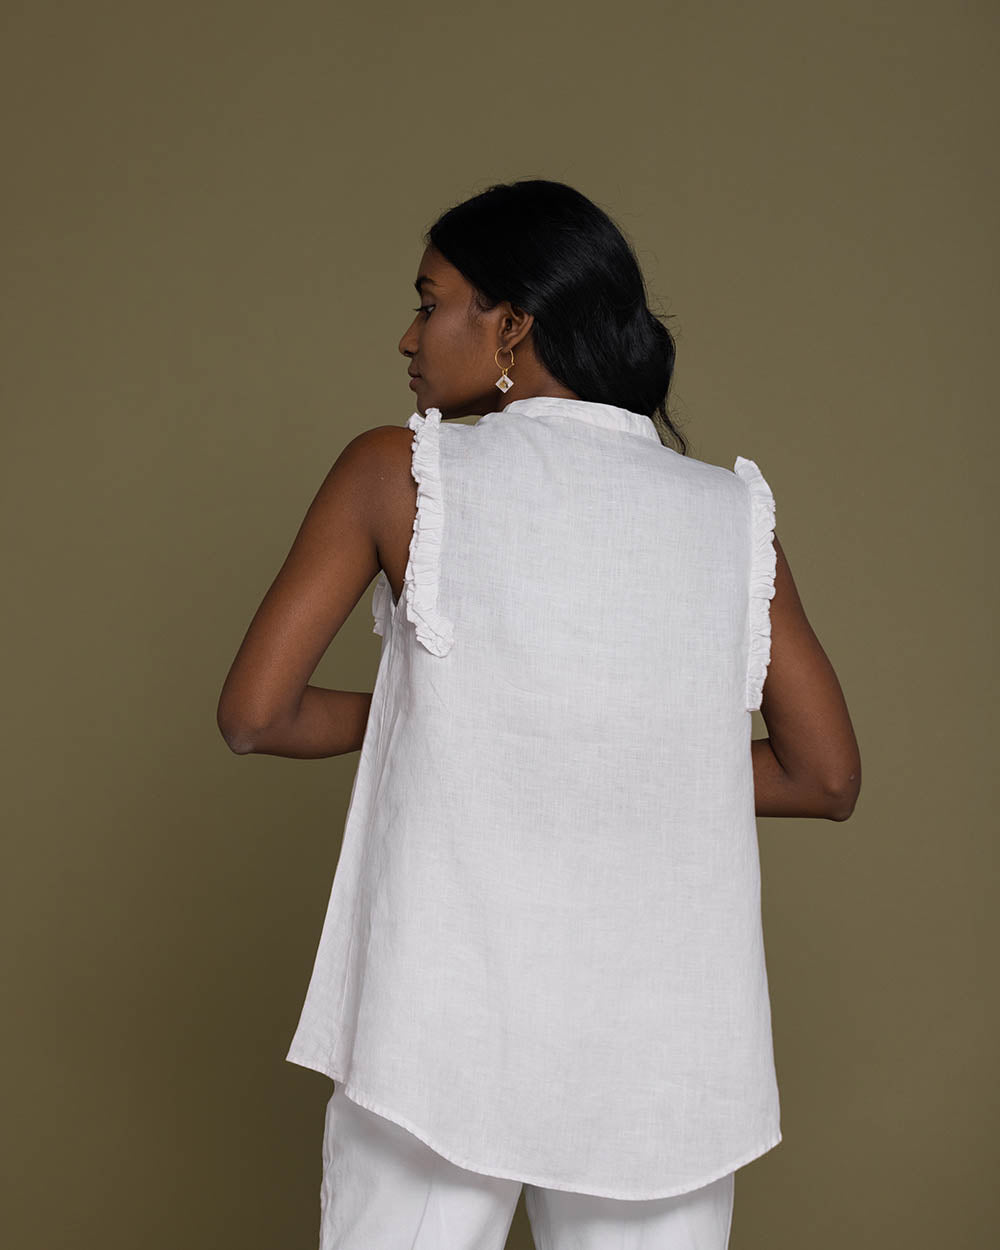 Wind In My Hair Shirt - Coconut White at Kamakhyaa by Reistor. This item is Casual Wear, Hemp, Natural, Sleeveless Tops, Solids, Tops, White, Womenswear